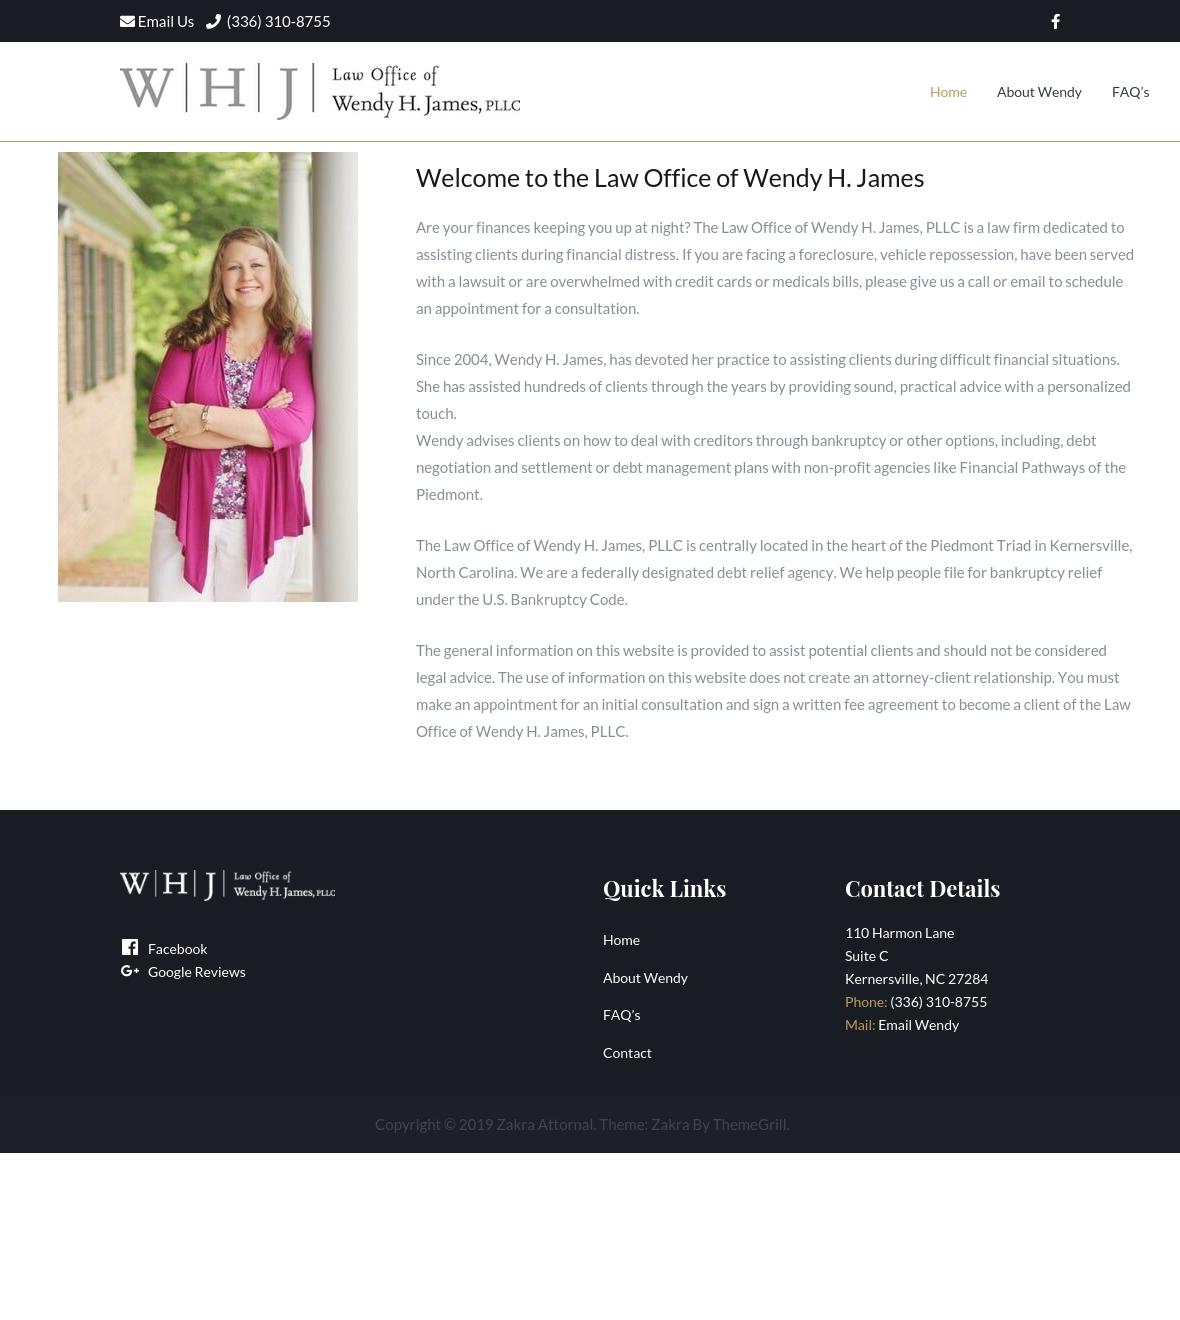 Law Office of Wendy H. James, PLLC - Kernersville NC Lawyers